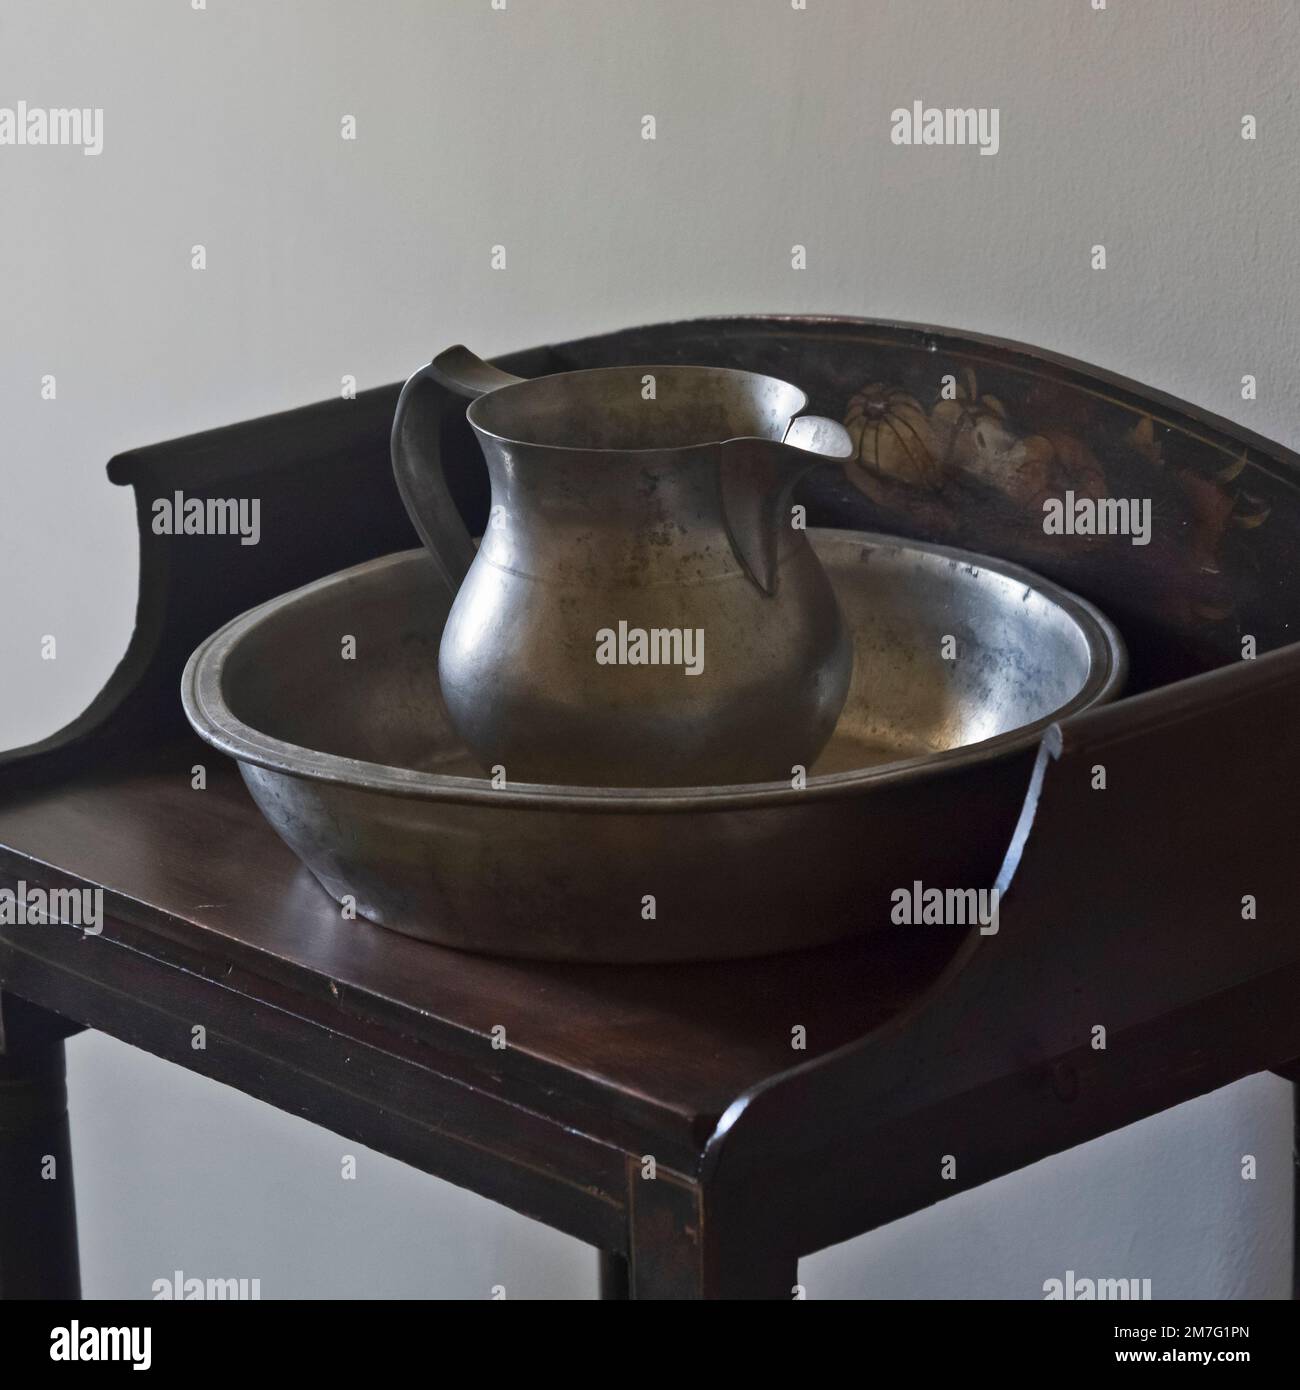 Metal bowl and jug on a wooden table. Hagley Museum, Wilmington, Delaware, USA Stock Photo